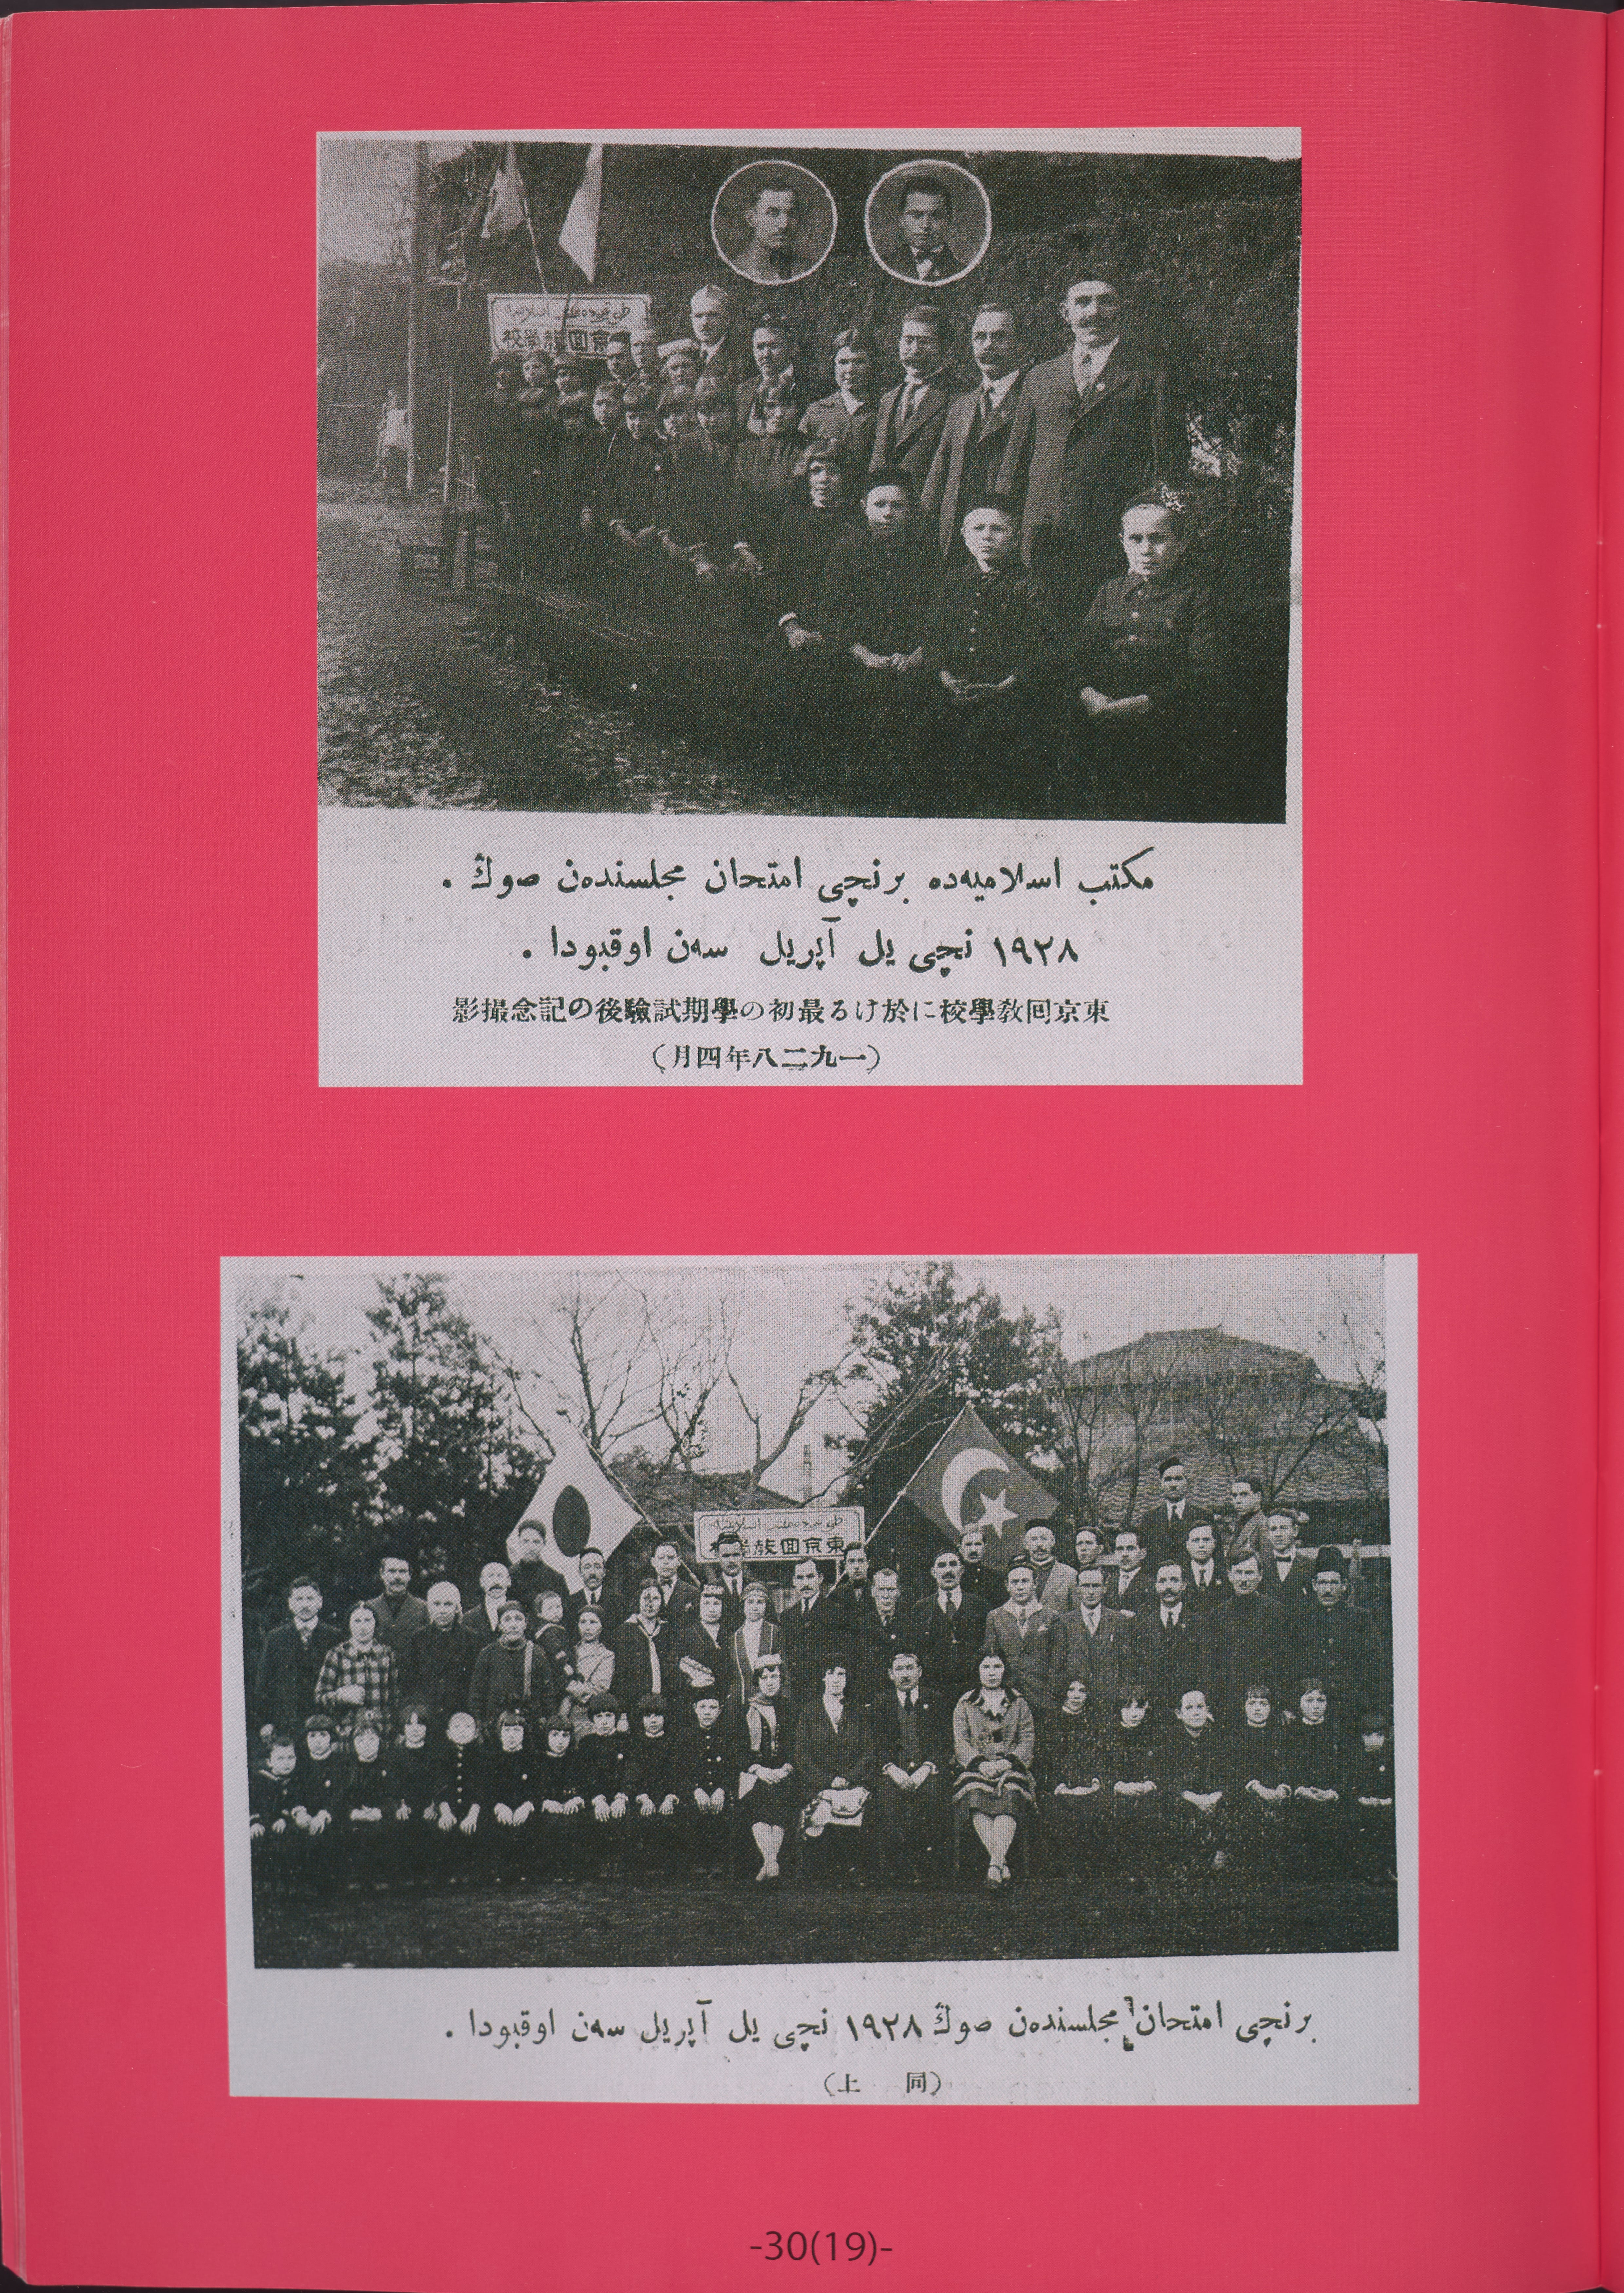 A page features two black and white historical photographs with captions in Arabic script, all set against a bright pink background. Both photos depict groups of people. The bottom photo shows flags behind the group. 